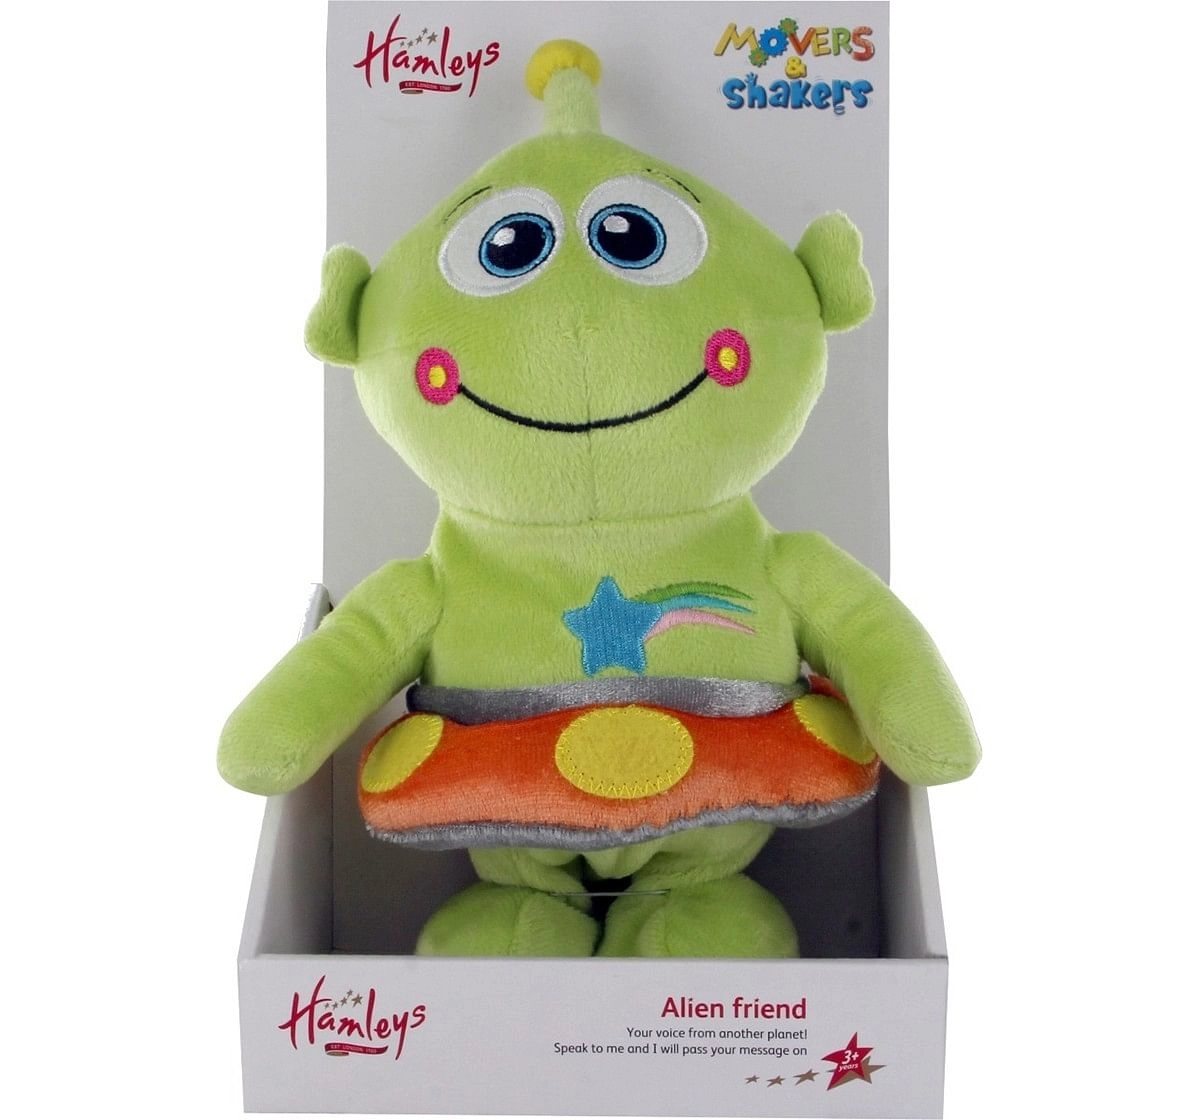 Hamleys Movers & Shakers -Alien Interactive Soft Toys for Kids age 3Y+ - 12 Cm 